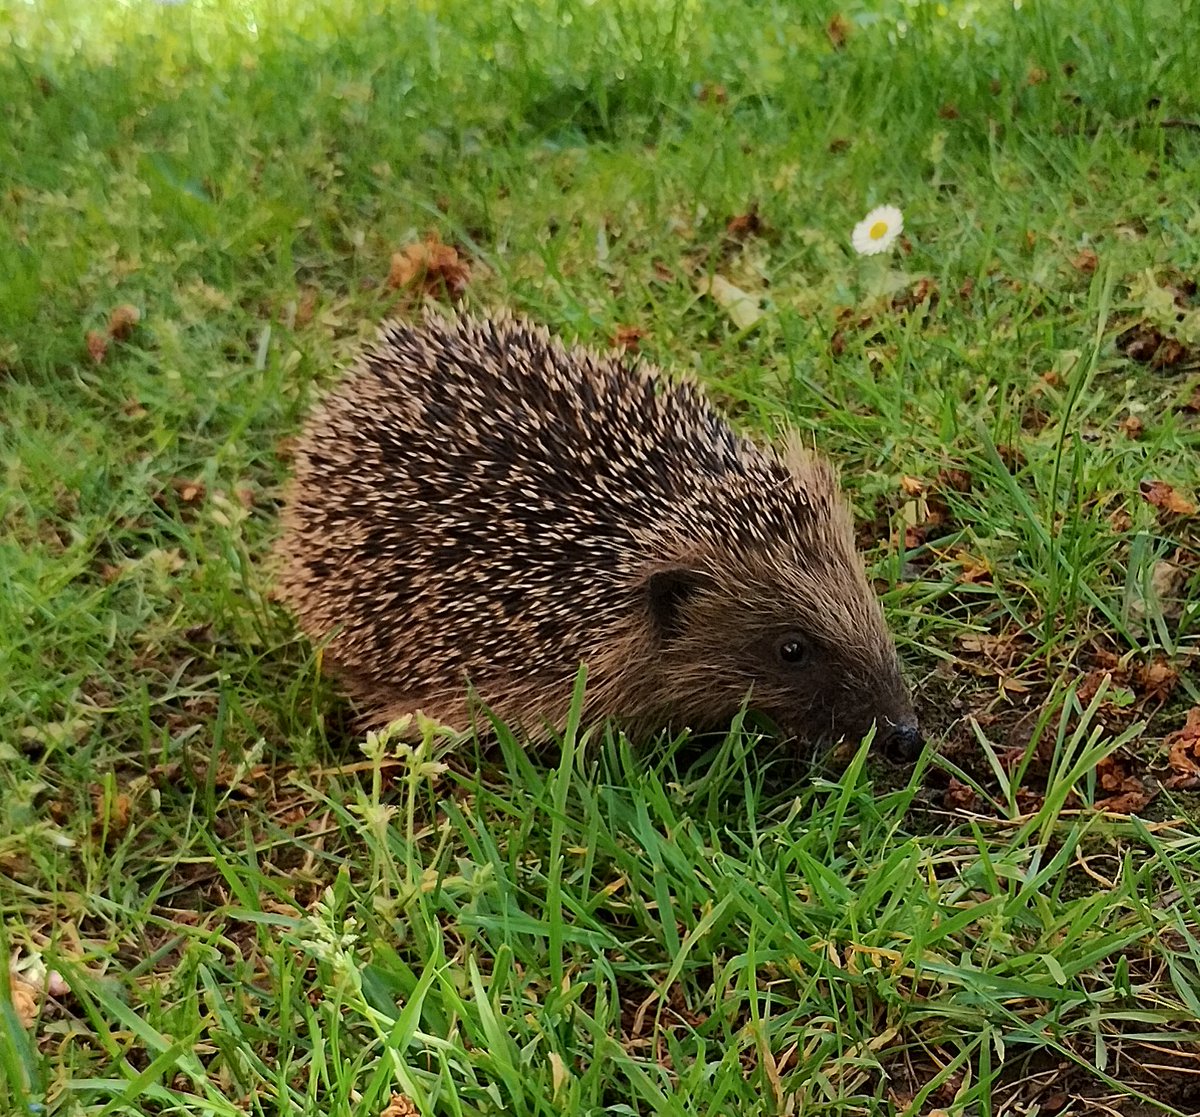 An actual real life hedgehog snuffling round our estate in broad daylight this morning 😍